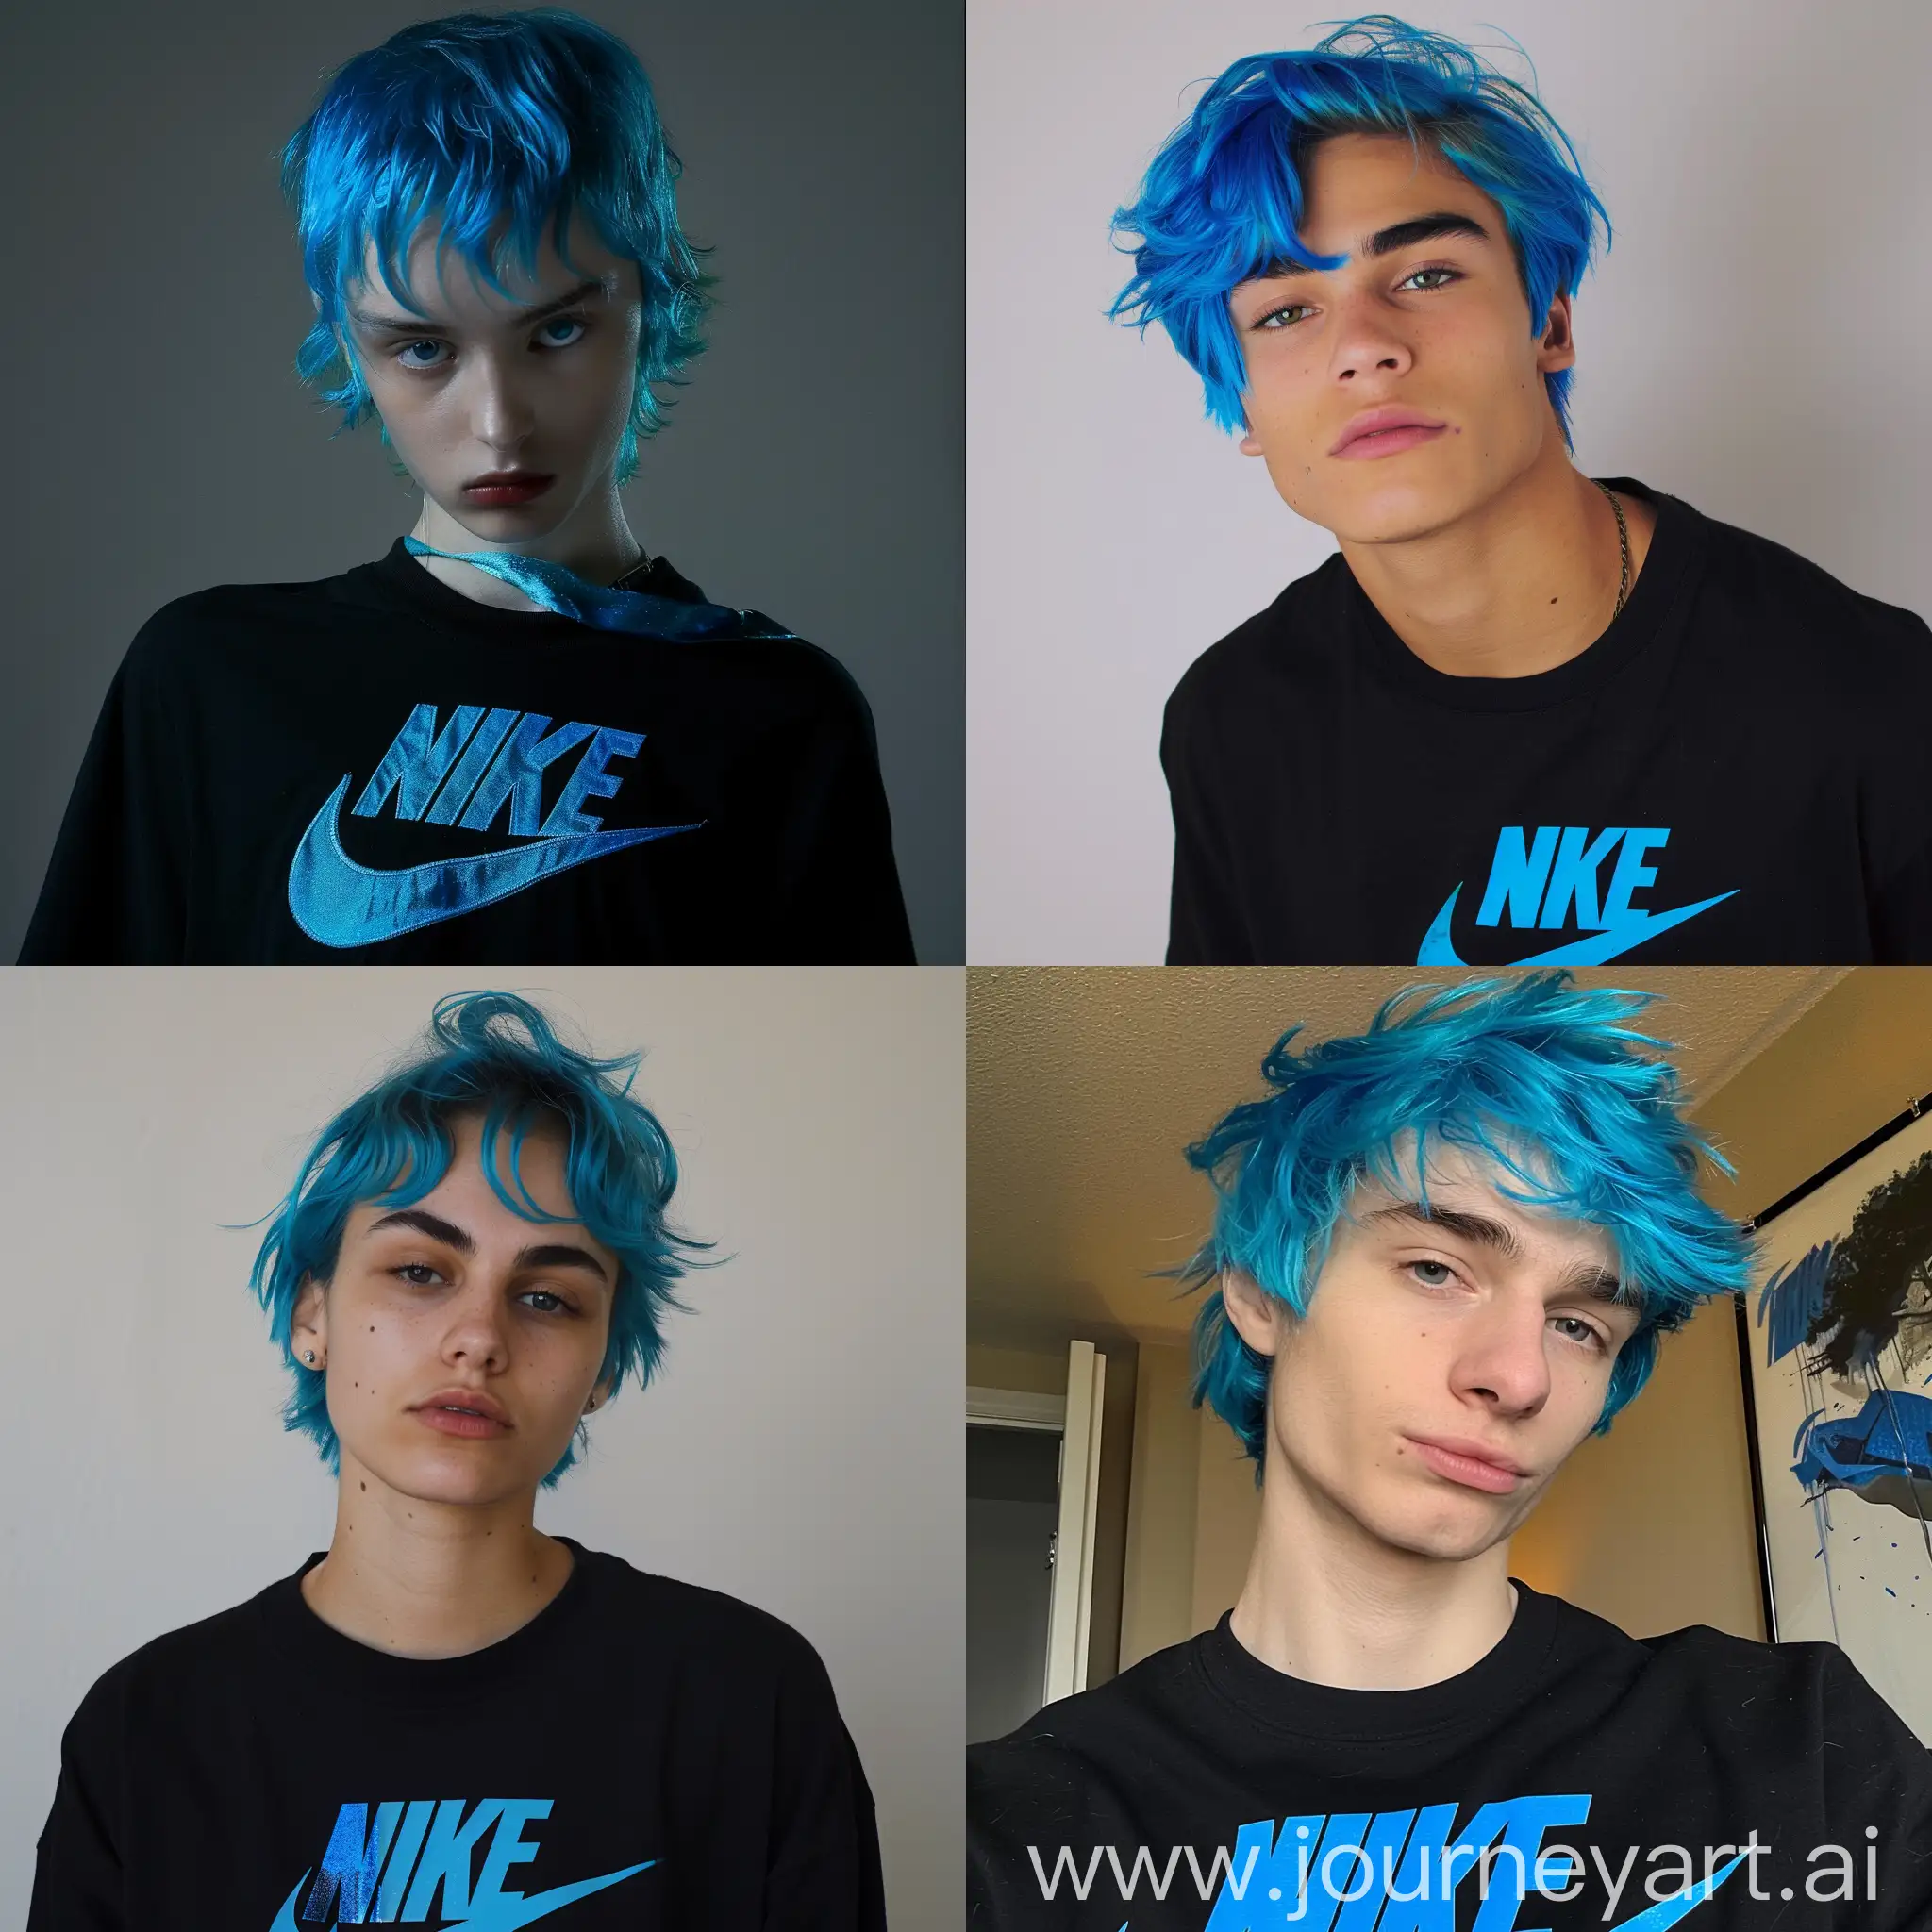 Human-with-Blue-Hair-and-Black-Shirt-Sporting-NikeInspired-Design